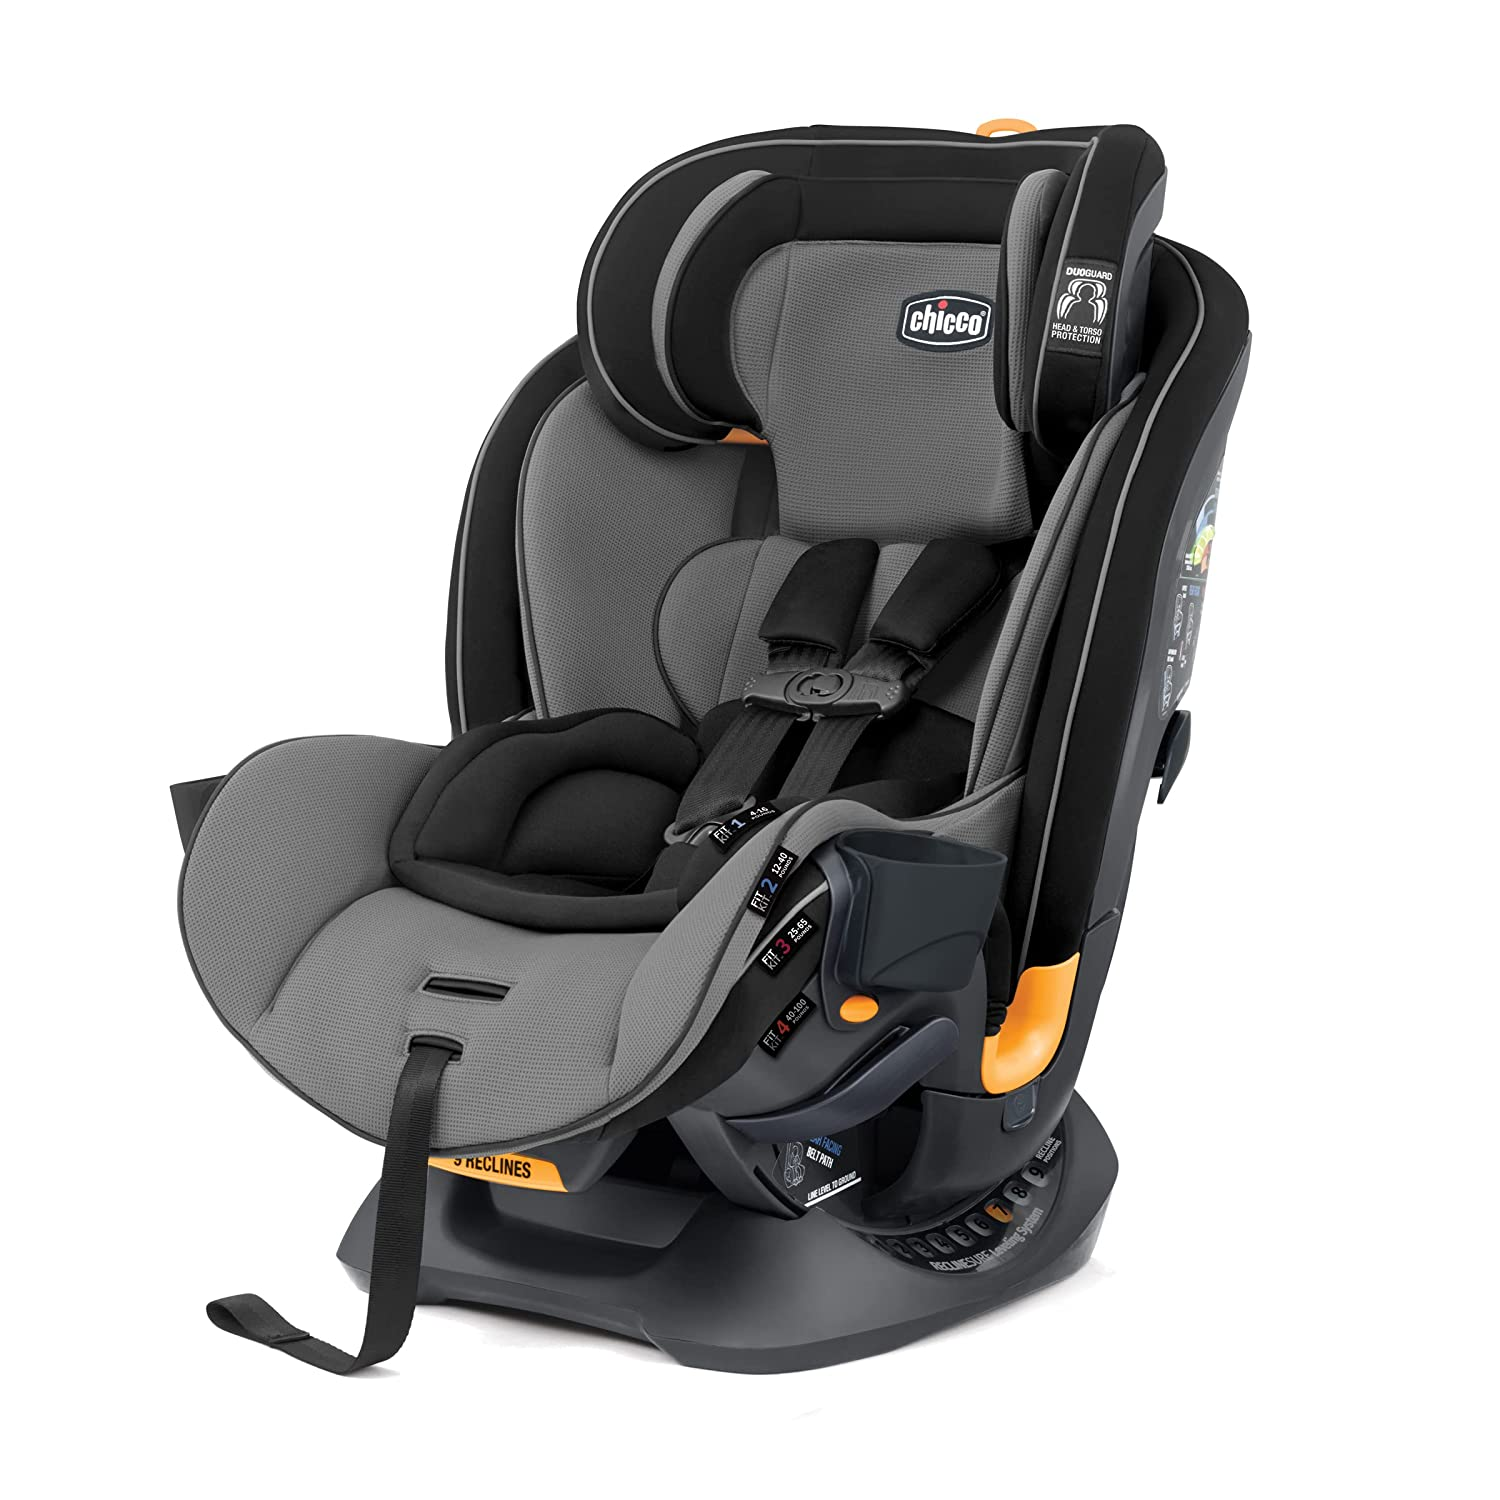 Chicco Fit4 4-In-1 Convertible Car Seat - Onyx (Black/Grey) $229.99